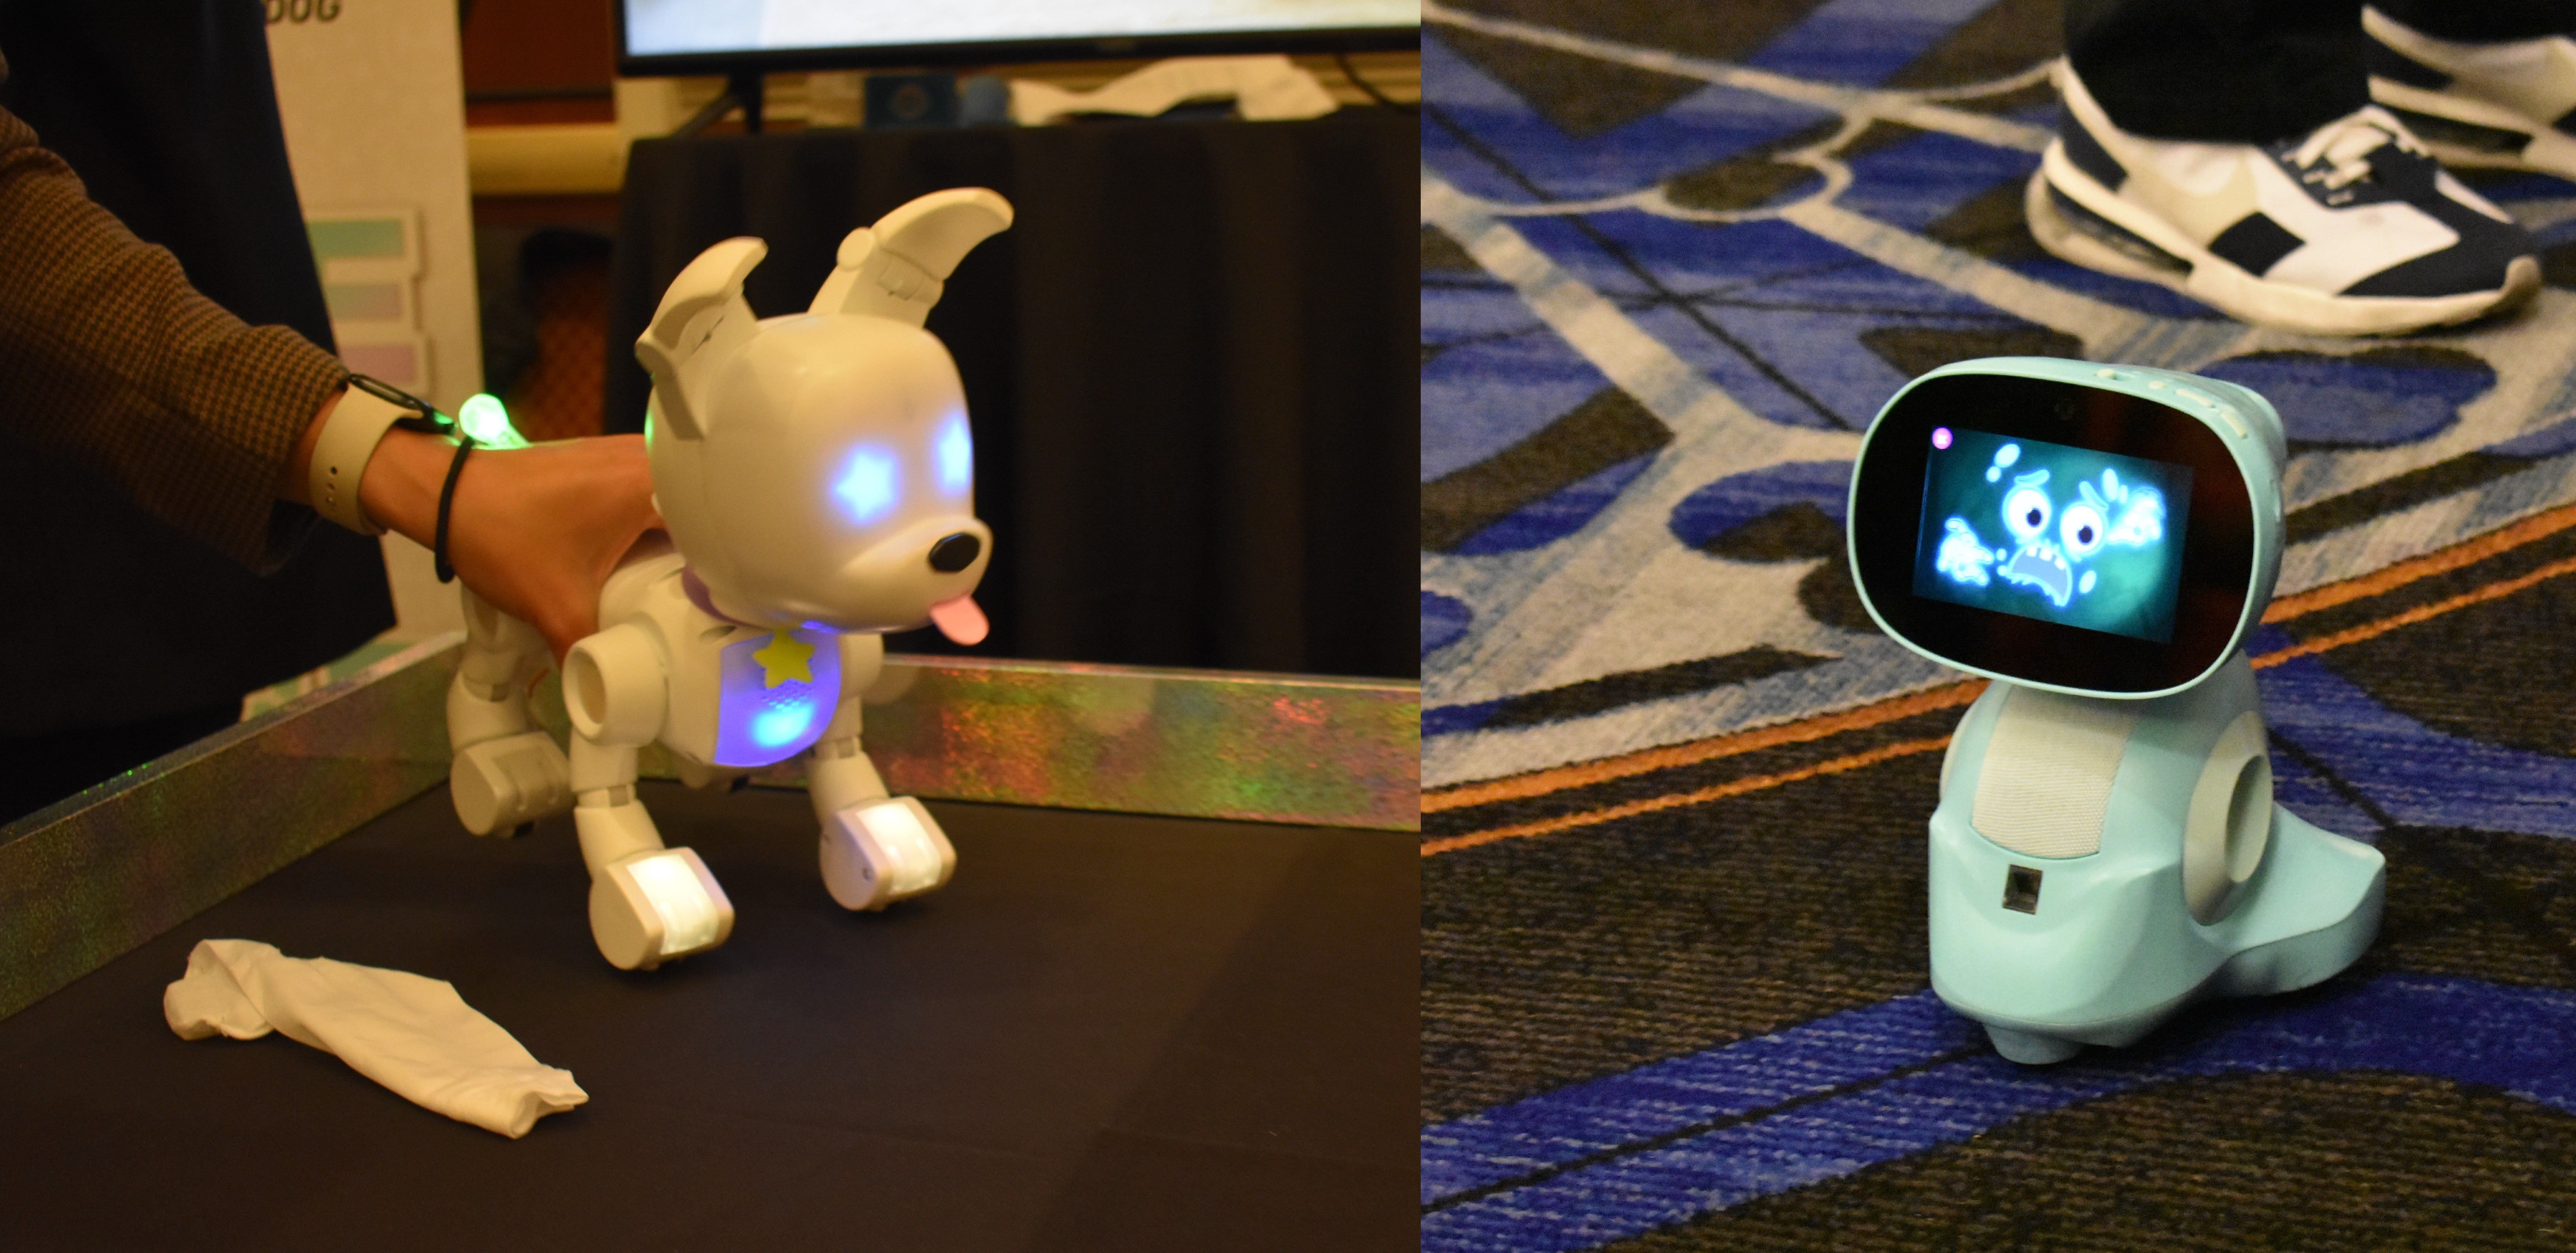 The Dog-E bot on the left and the Miko bot on the right are both competing for the family floor space to zip around on.  (Photo: Kyle Barr/Gizmodo)